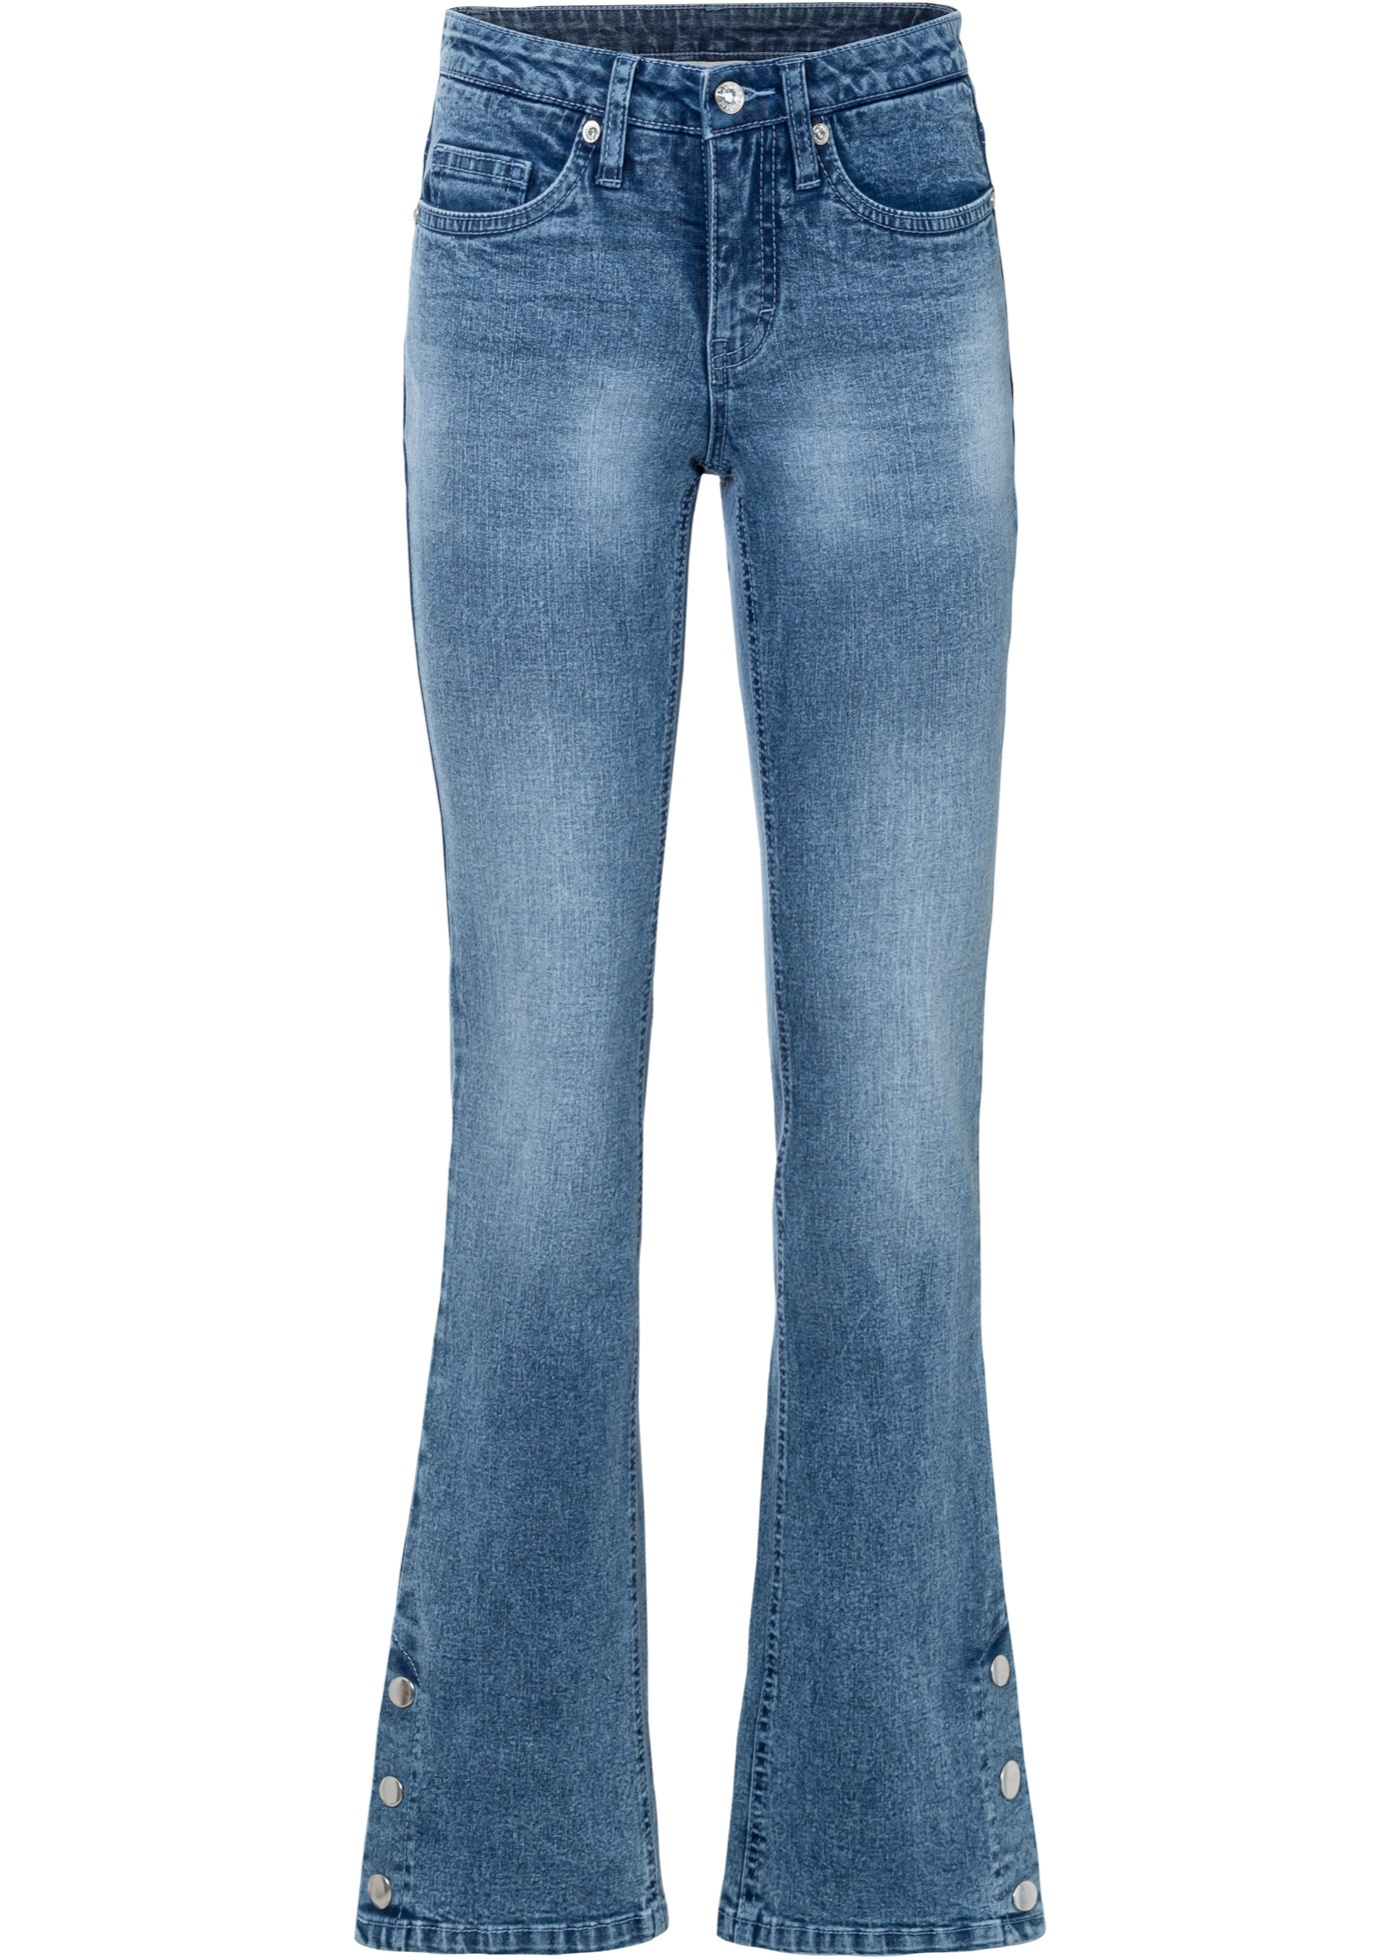 Stretch jeans, bootcut